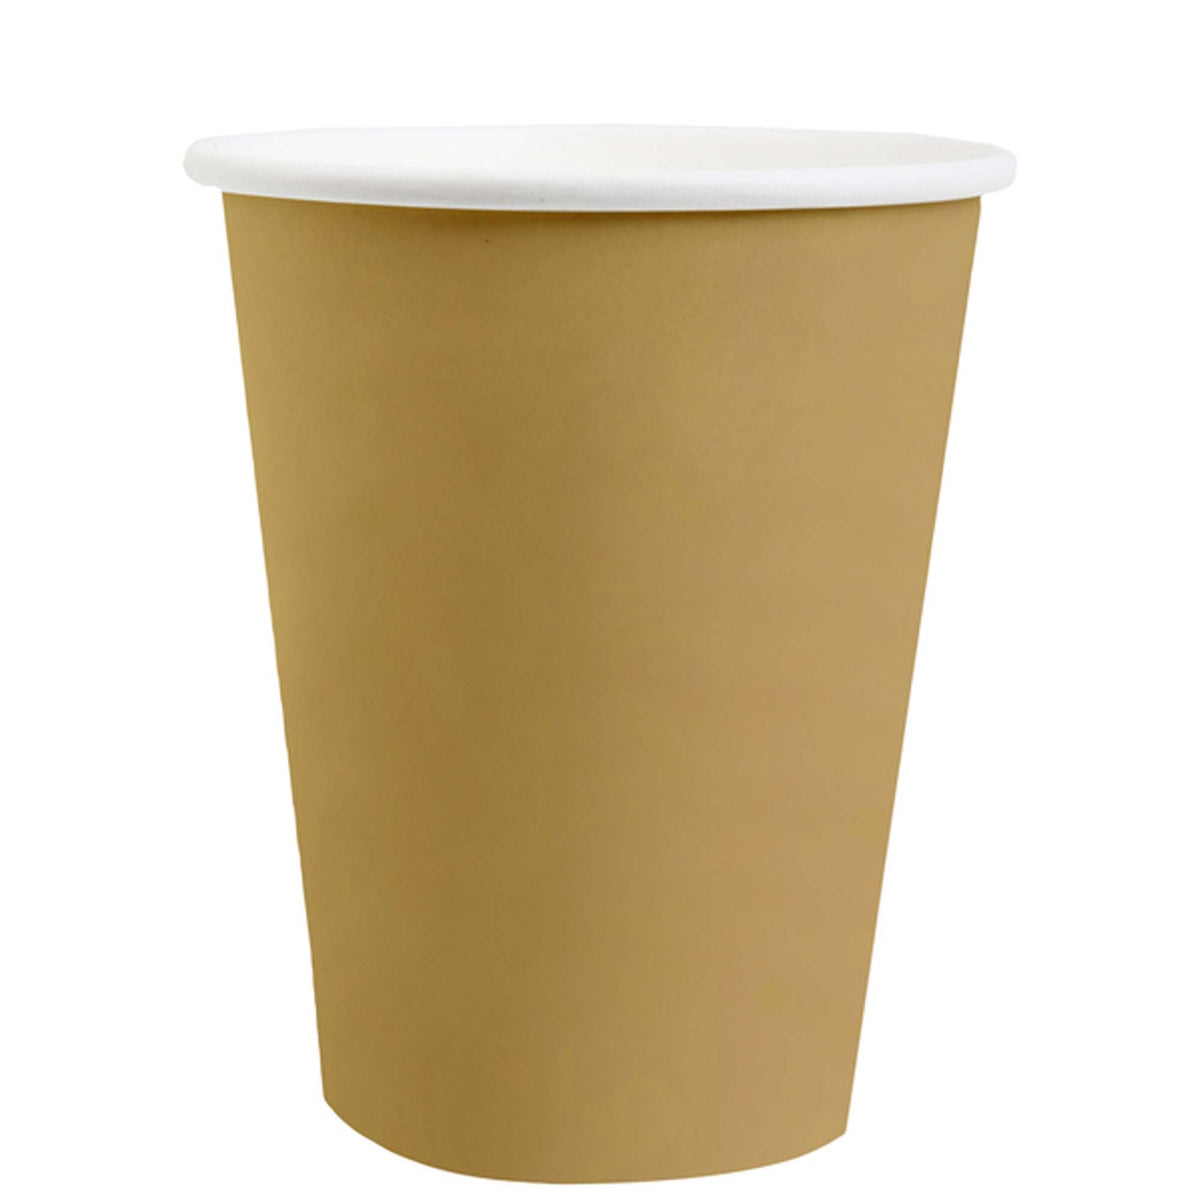 SANTEX Everyday Entertaining Gold Party Paper Cups, 9 Oz, 10 Count 3660380072843